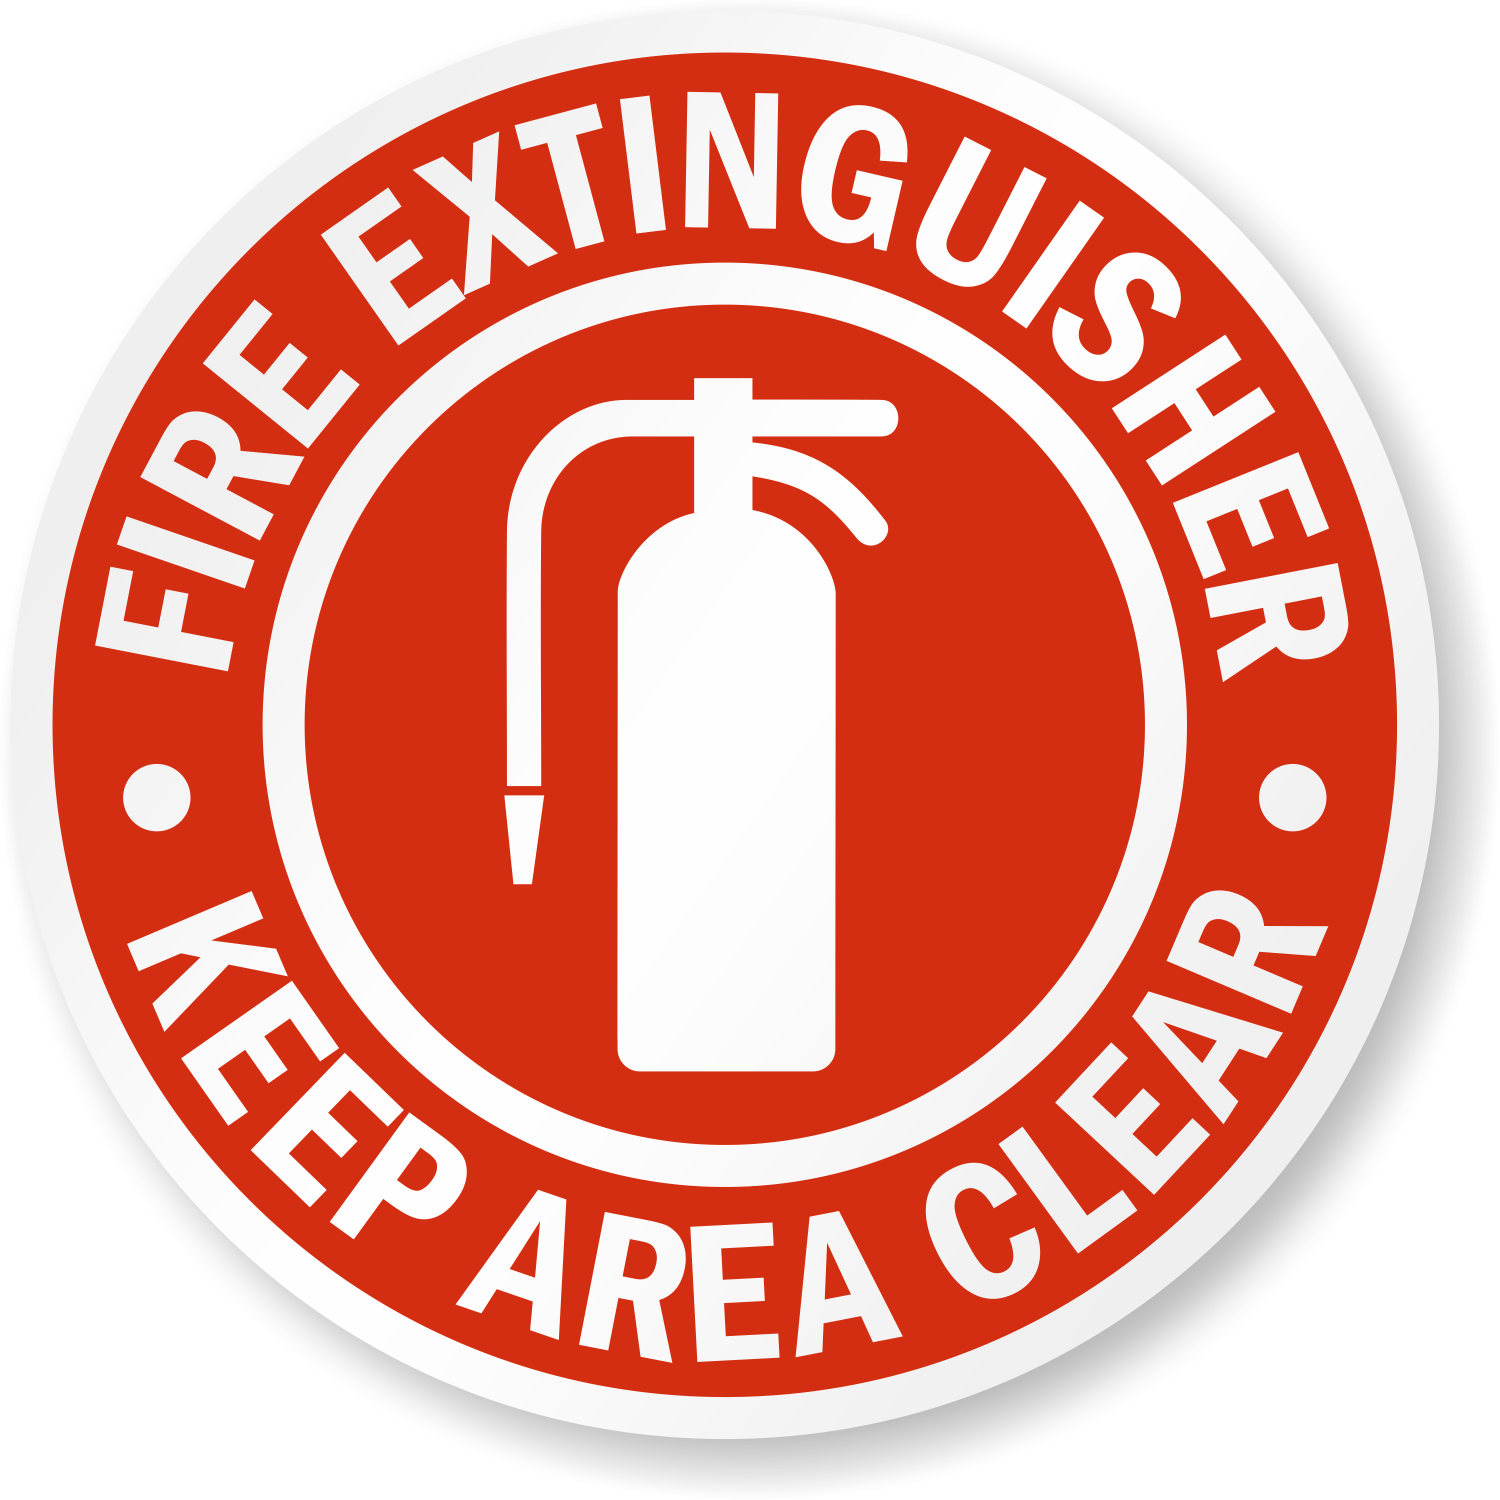 Fire Extinguisher Signs Printable